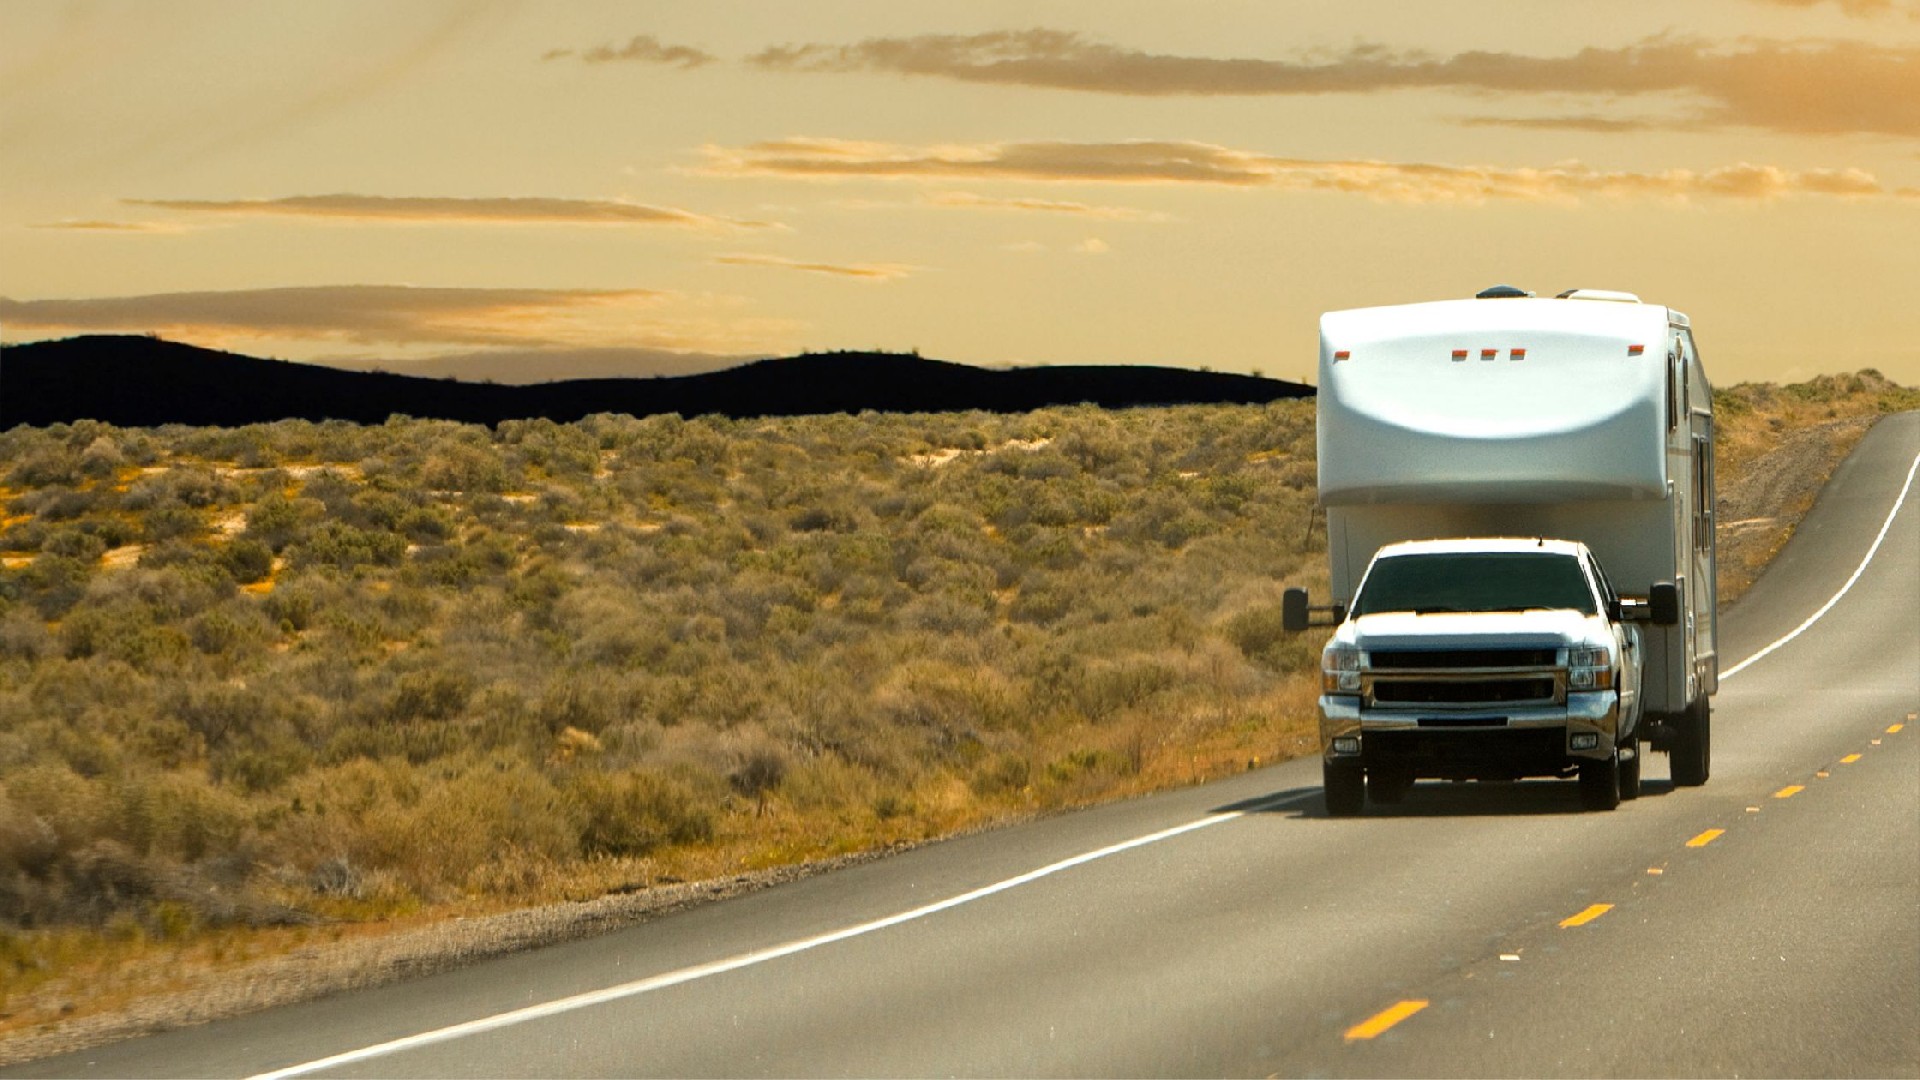 Travel trailer vs Motorhome: How to Choose Between the Two